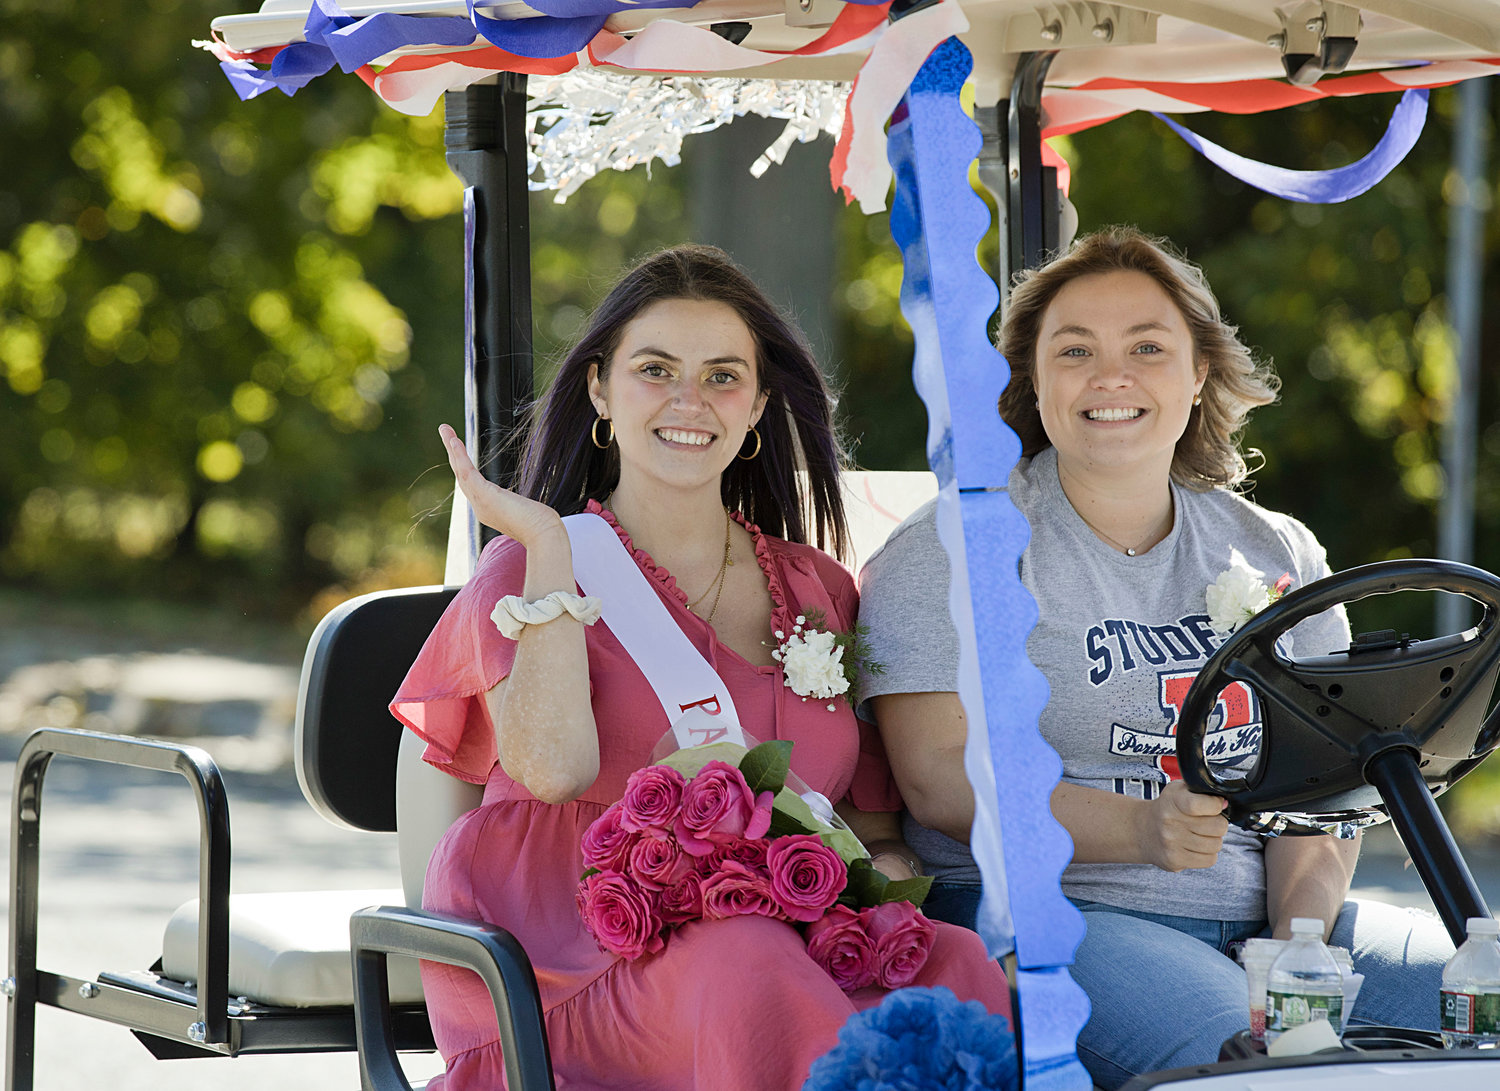 Homecoming Parade Grand Marshal Kristina Caragianis waves to spectators while being driven along the parade route by Hailey Abbott.